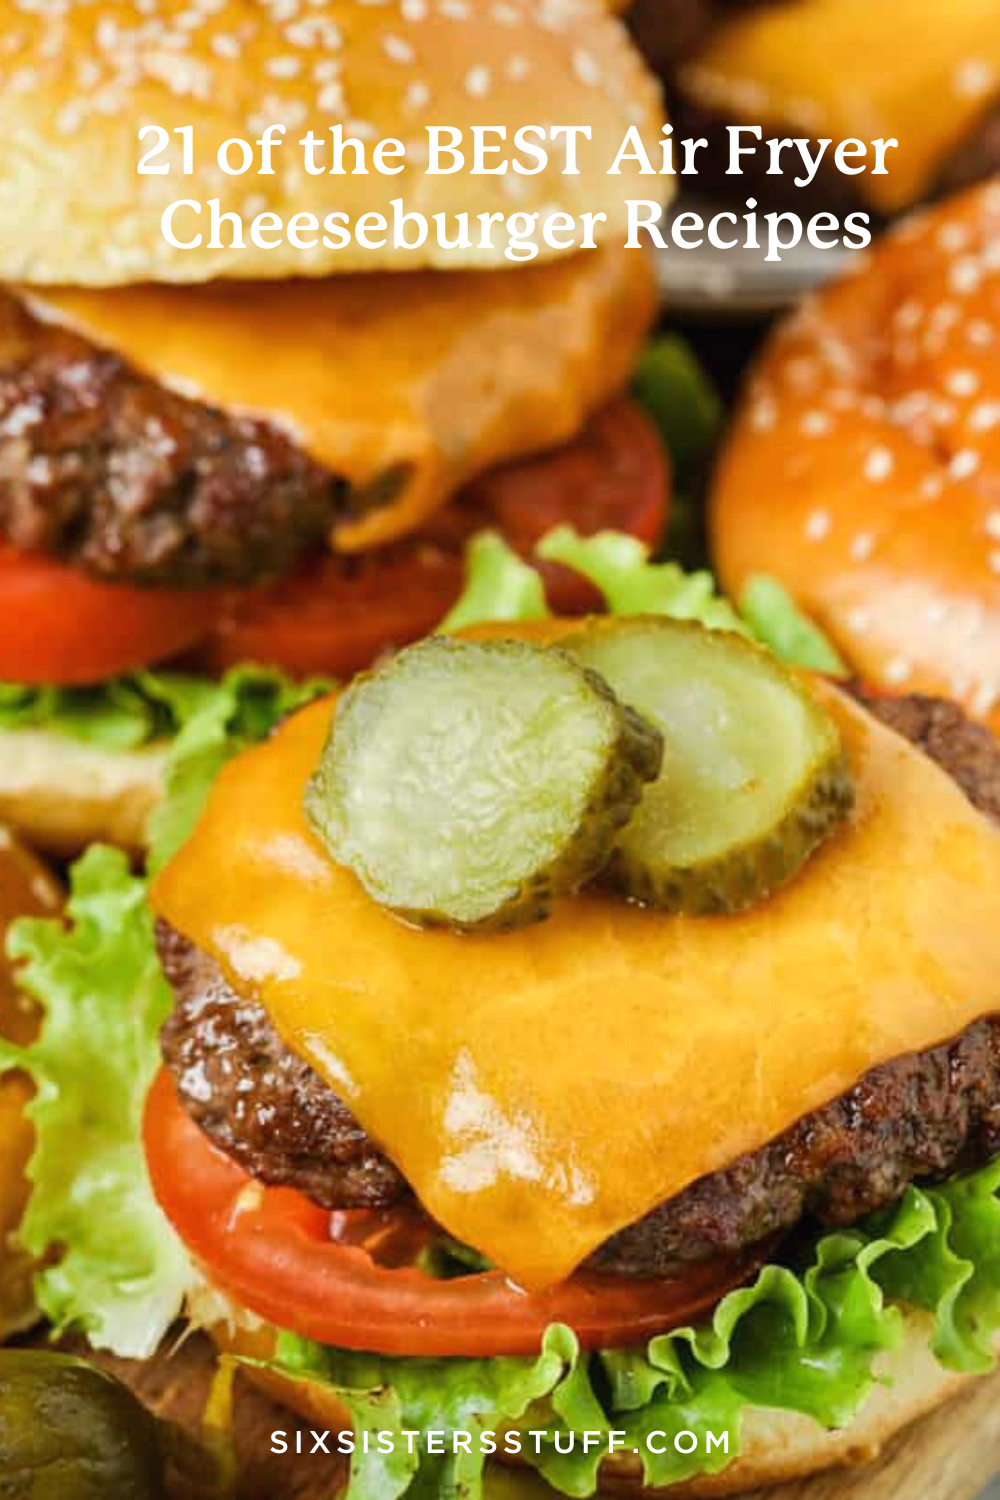 21 of the BEST Air Fryer Cheeseburger Recipes